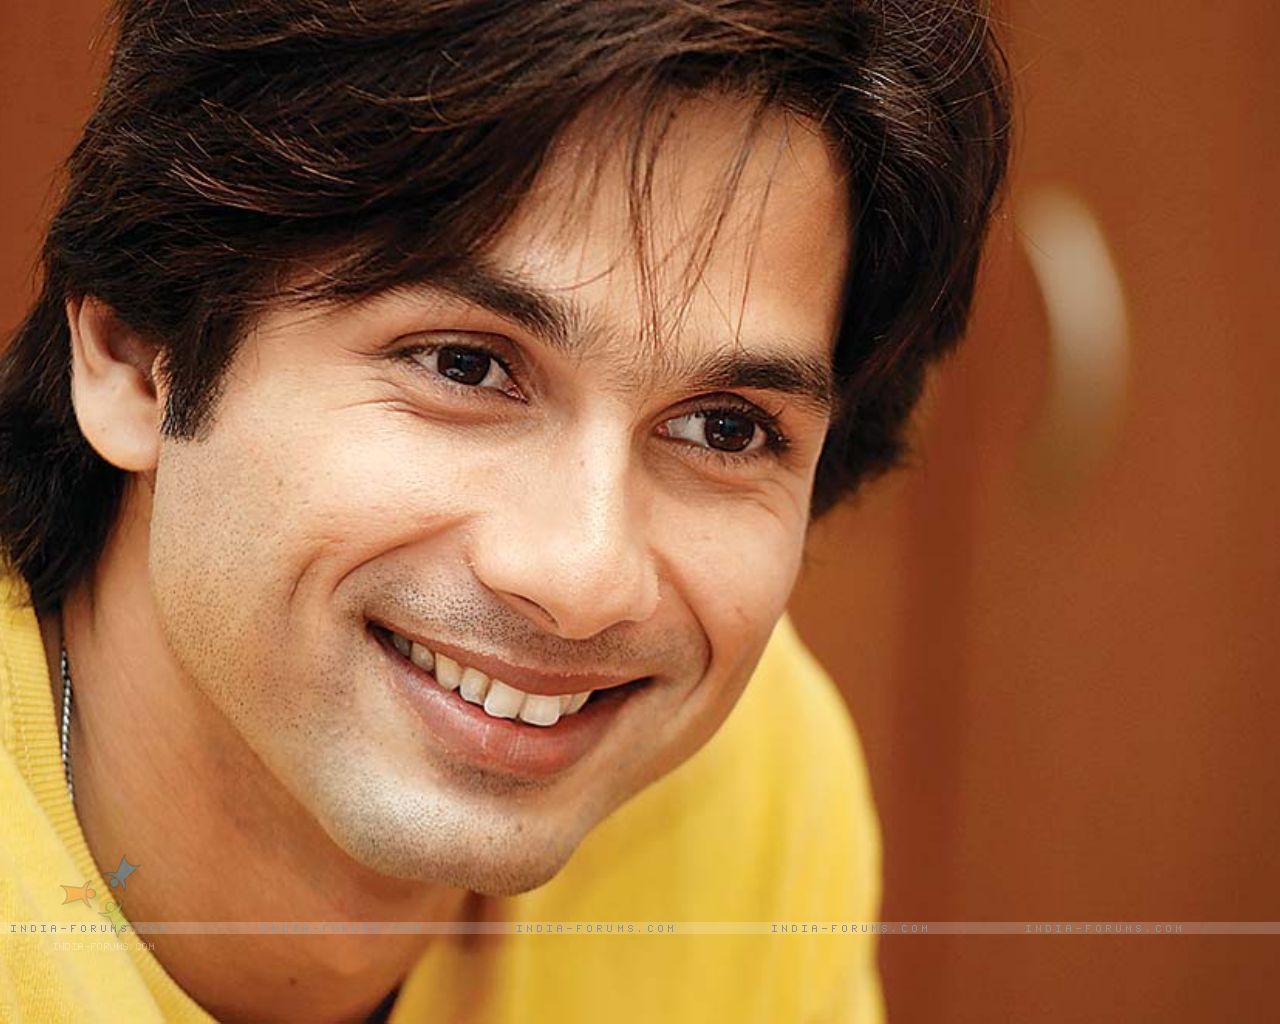 Download Free HD Wallpapers Of Shahid Kapoor